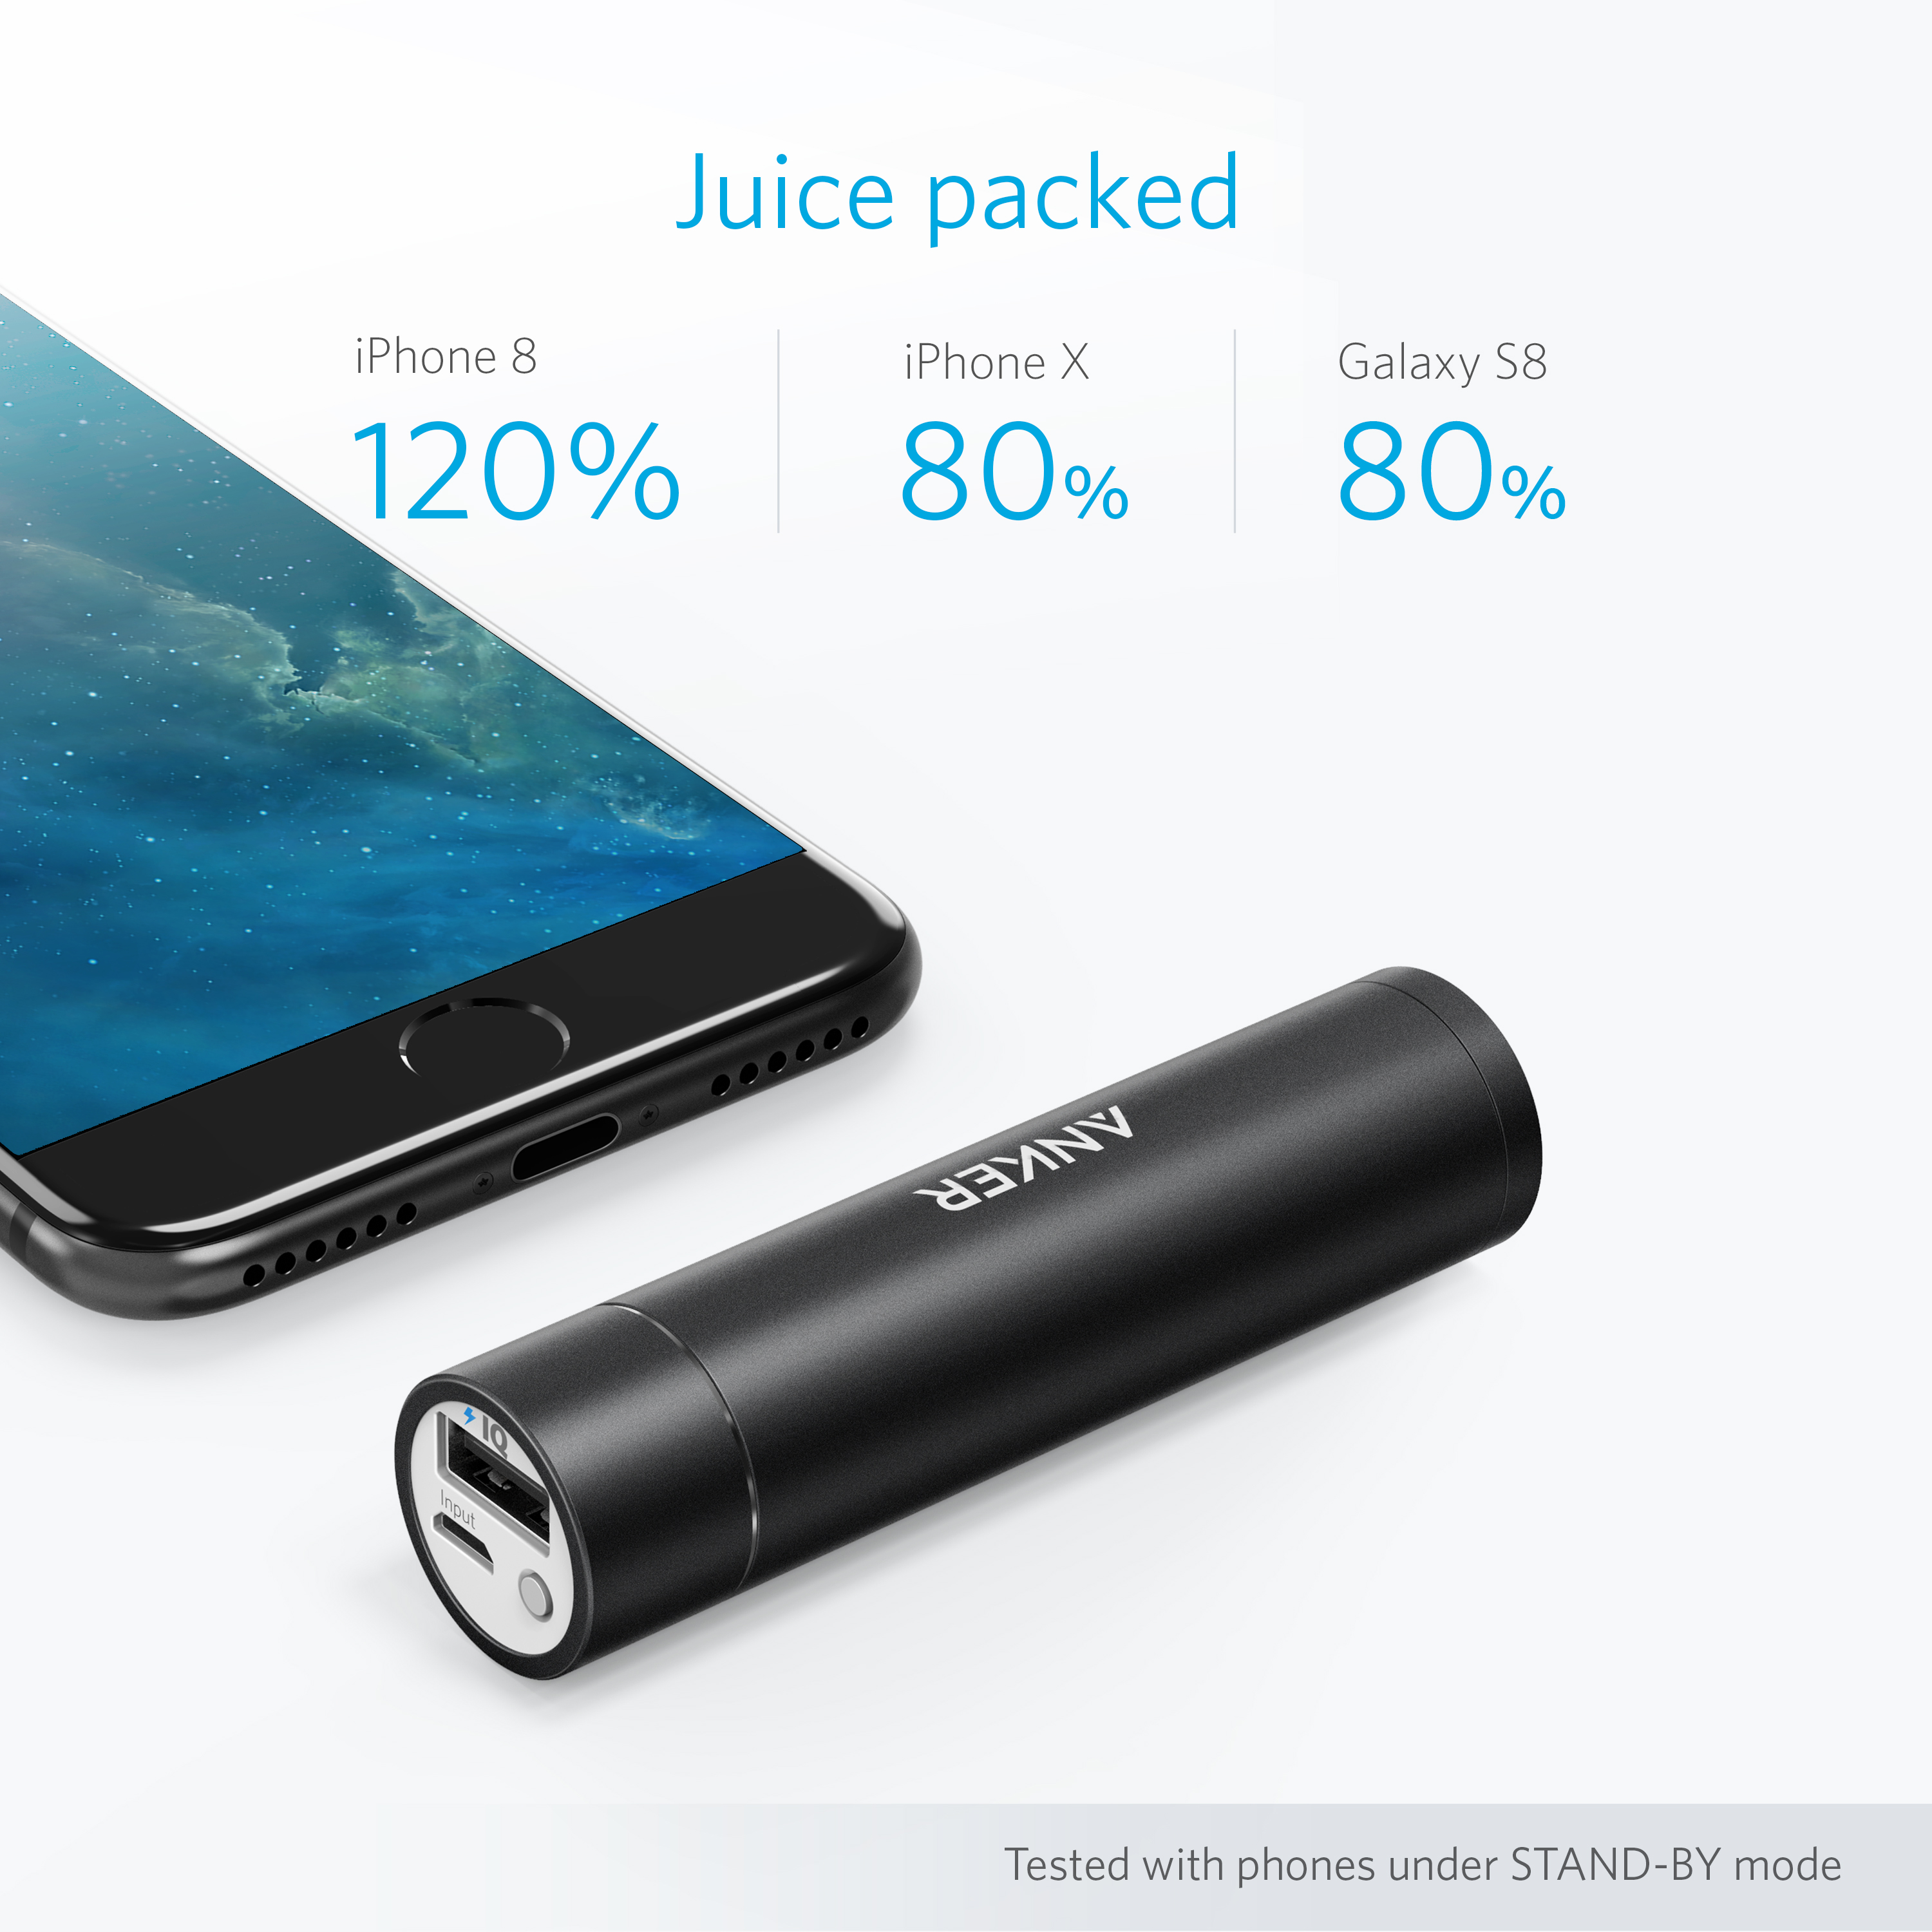 Anker PowerCore+ mini, 3350mAh Lipstick-Sized Portable Charger (3rd Generation, Premium Aluminum Power Bank), One of the Most Compact External Batteries - image 4 of 7